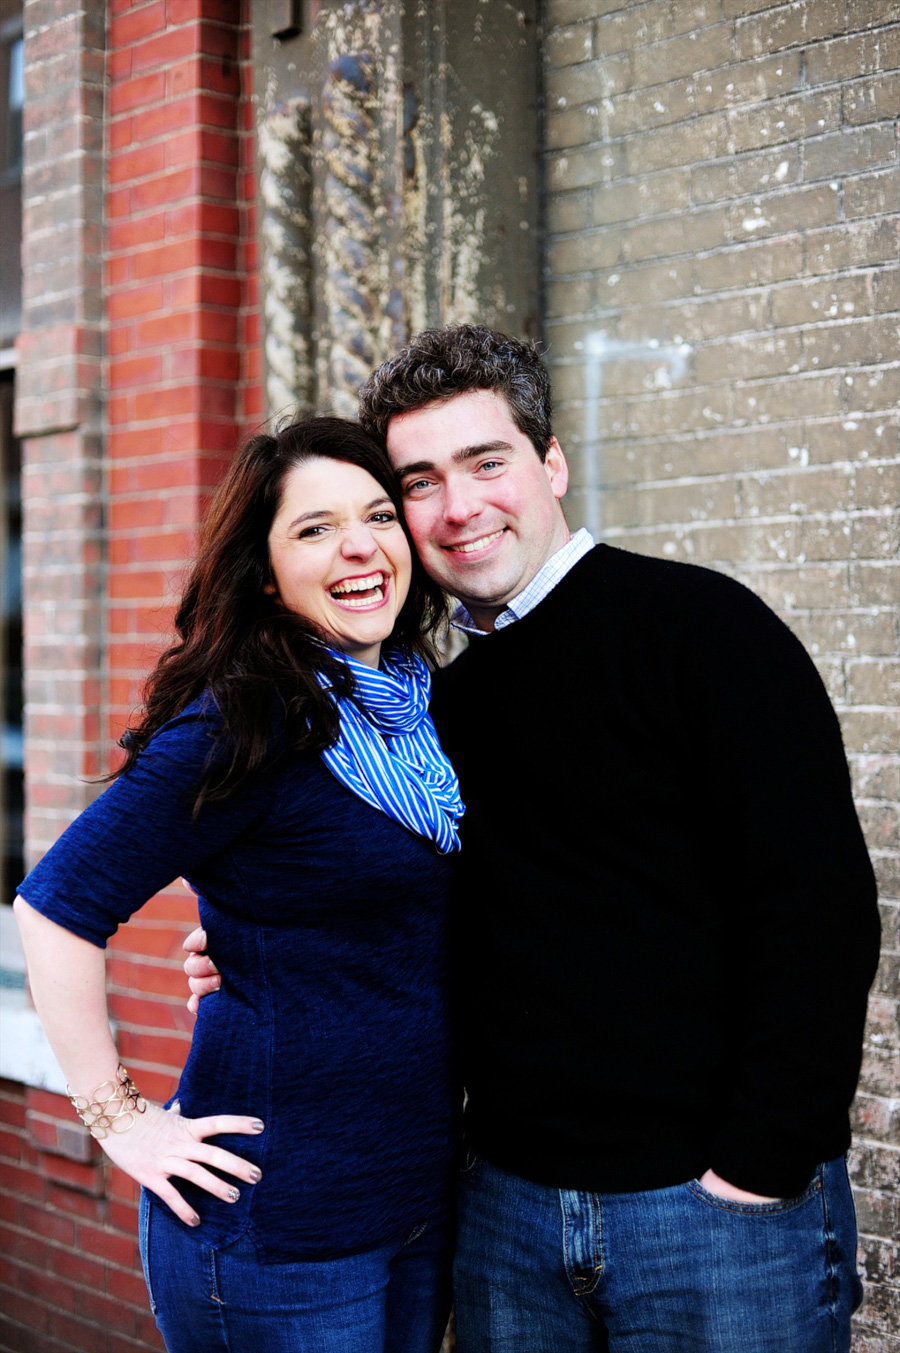 Cortney & Josh were SO happy during their shoot -- Josh made her laugh a ton. :)